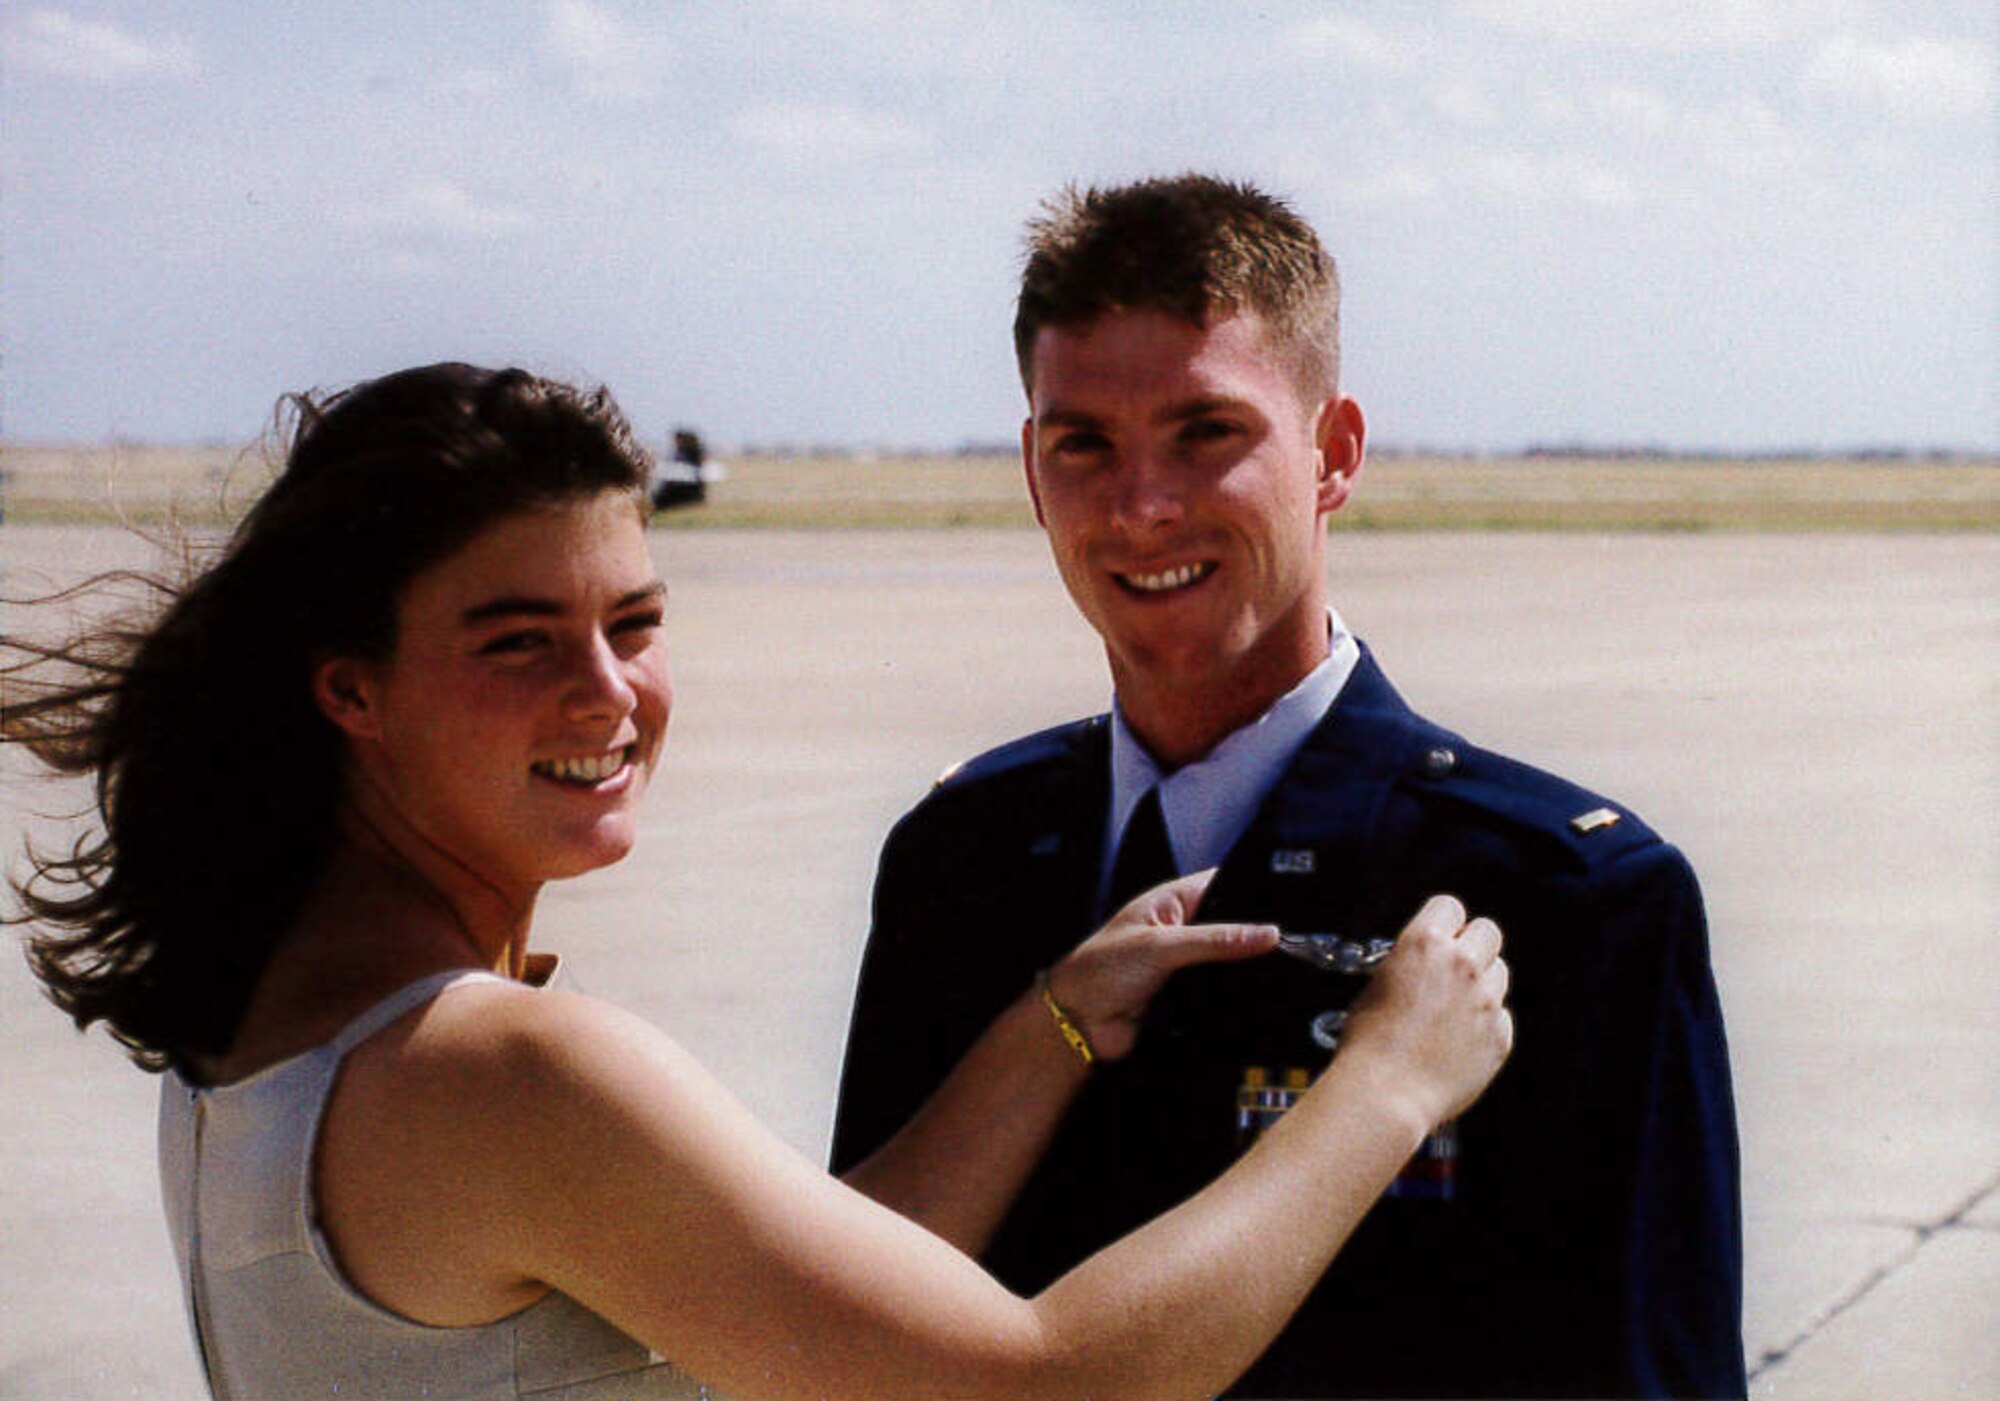 Nicole Woolford pins on her husband then 2nd Lt. Jeffrey Woolford’s pilot wings. Woolford joined the Air Force as a crew chief in 1989 and commissioned as an A-10 Thunderbolt II pilot nine years later. He credits his wife to much of his success in his career. Maj. Woolford is currently a student at Johns Hopkins University studying for his Master’s Degree in Public Health. He is attending the school through Air University’s Air Force Institute of Technology. (U.S. Air Force courtesy photo)